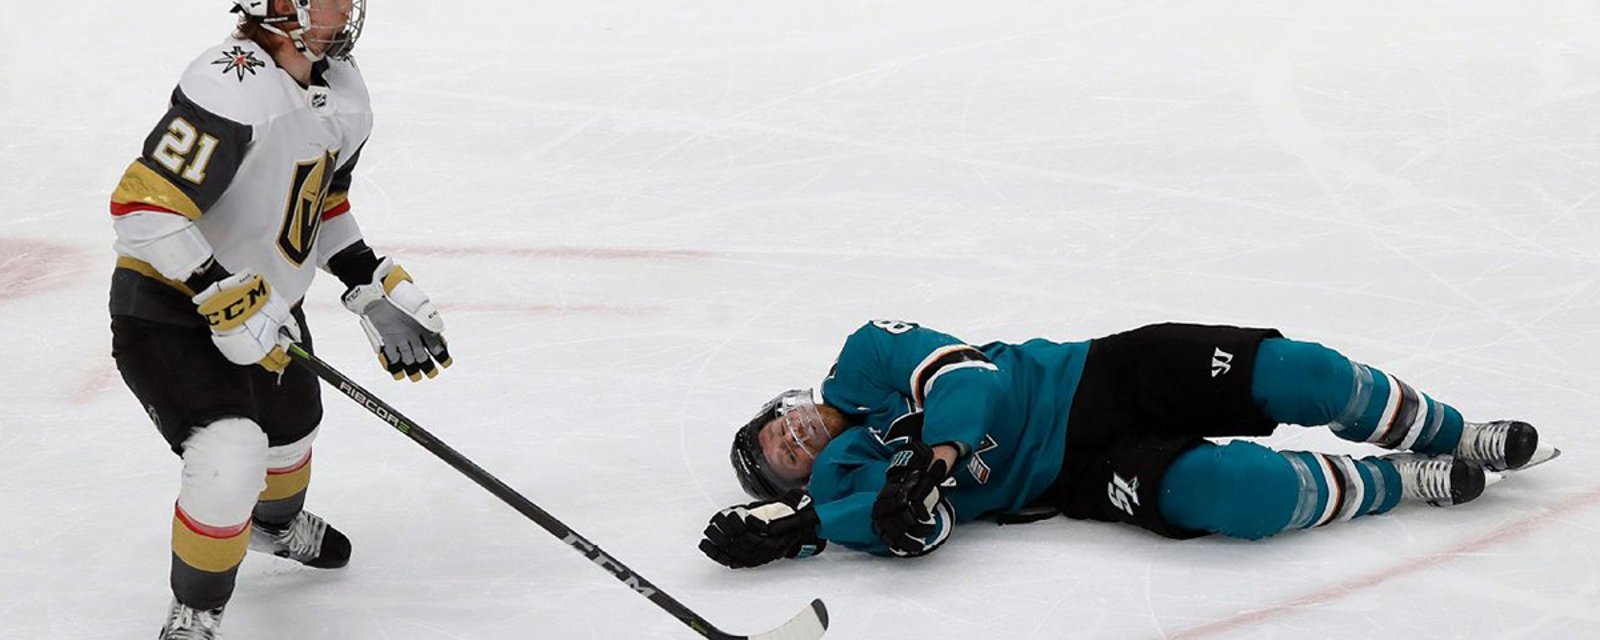 NHL officially owns up and apologizes for blown call in Sharks/Knights Game 7